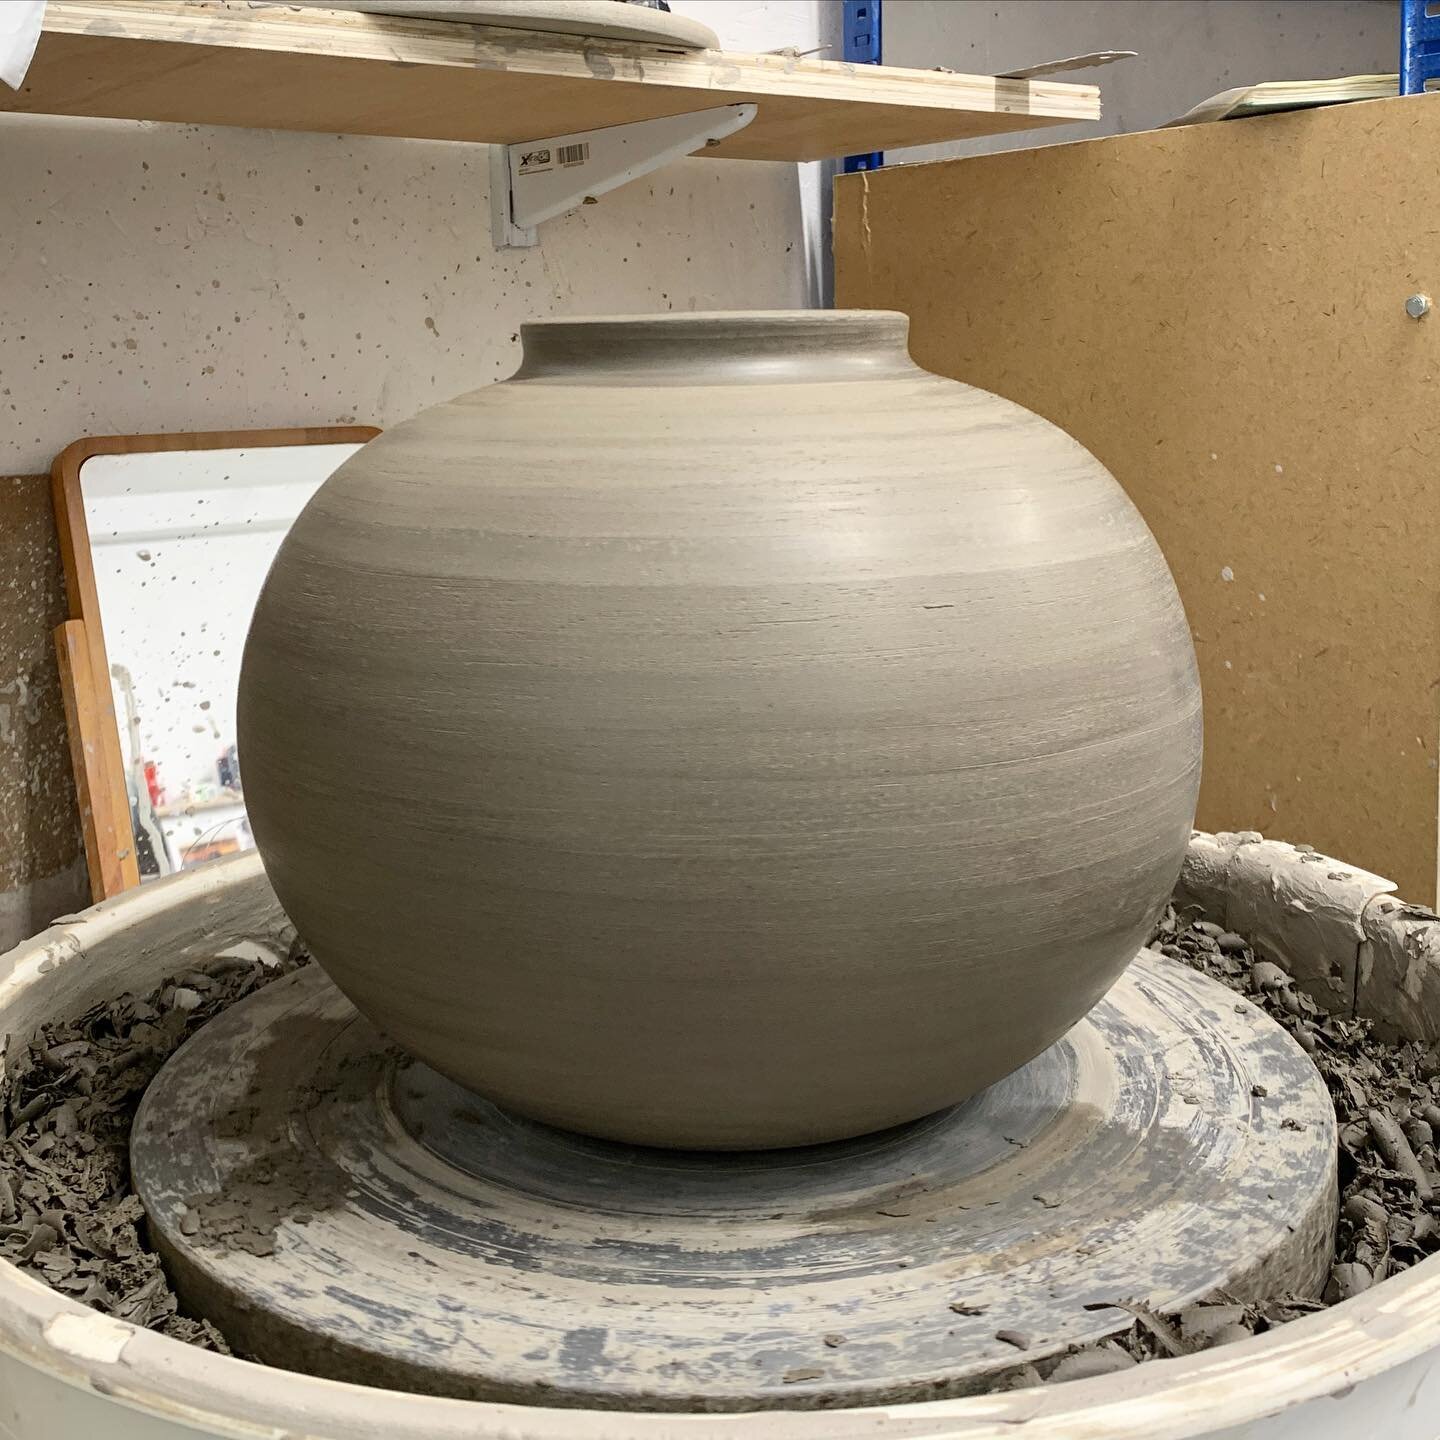 Lately in clay